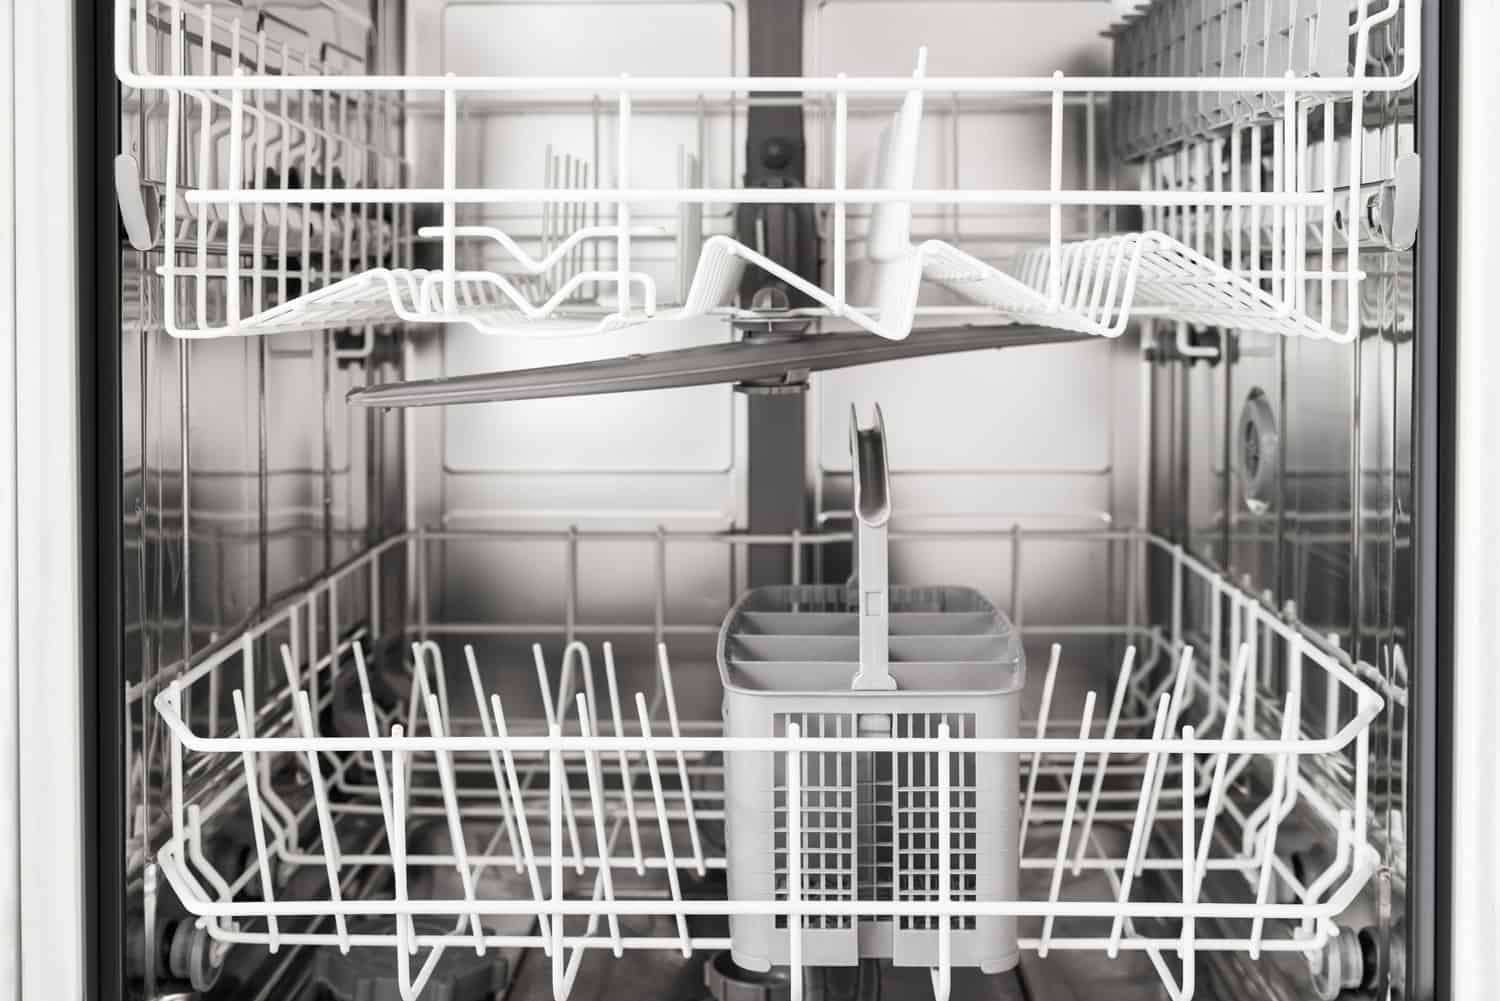 How To Get Rid Of Mold In A Dishwasher